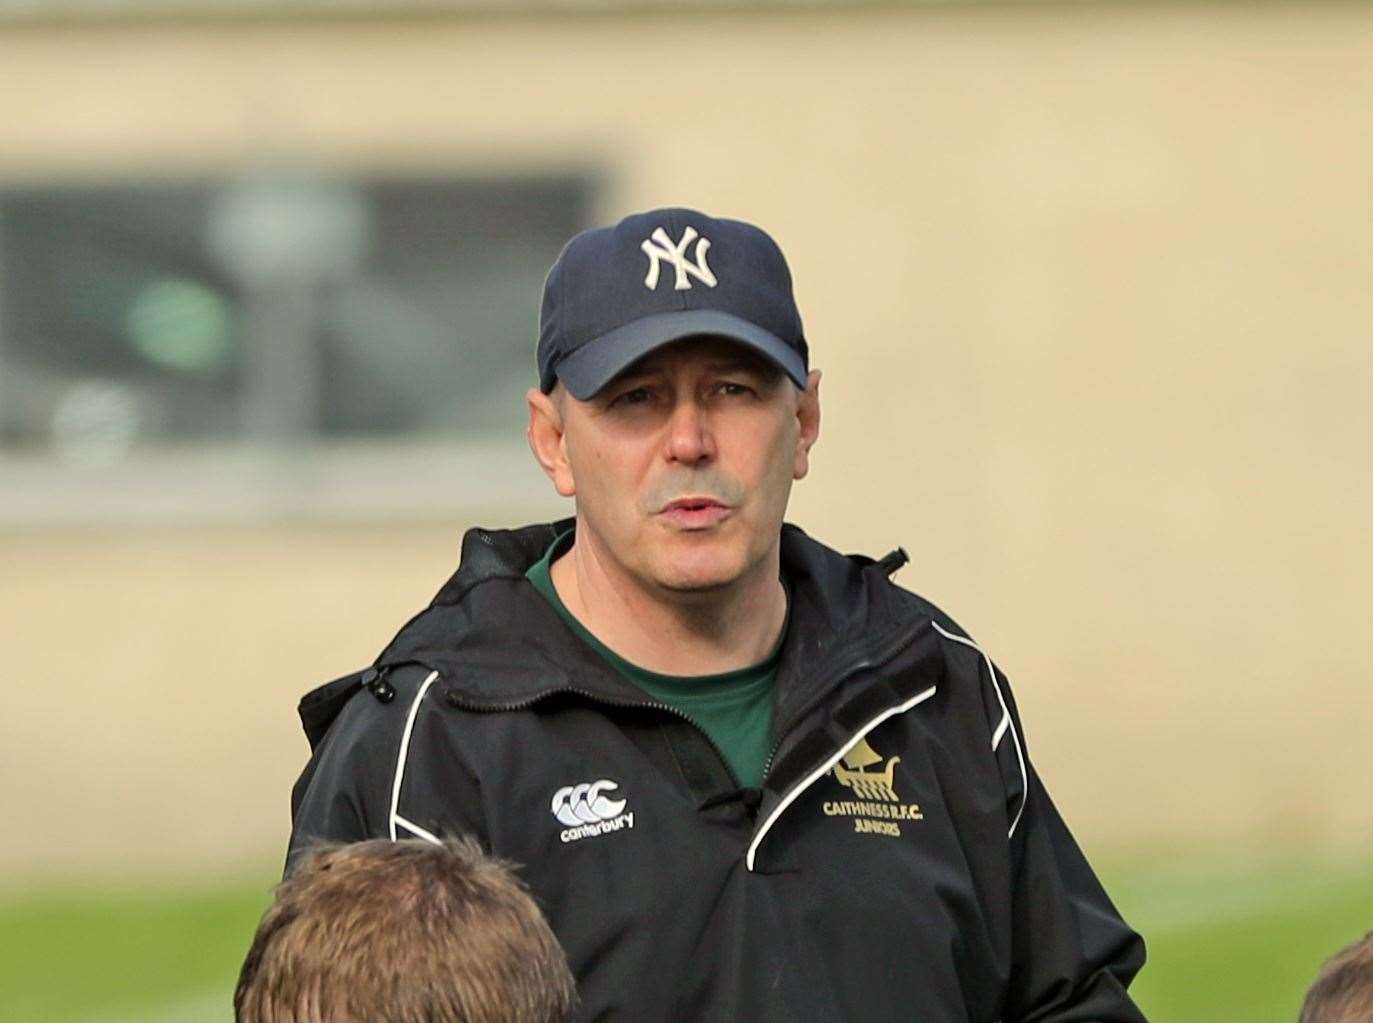 Caithness RFC coach Kenny Russell